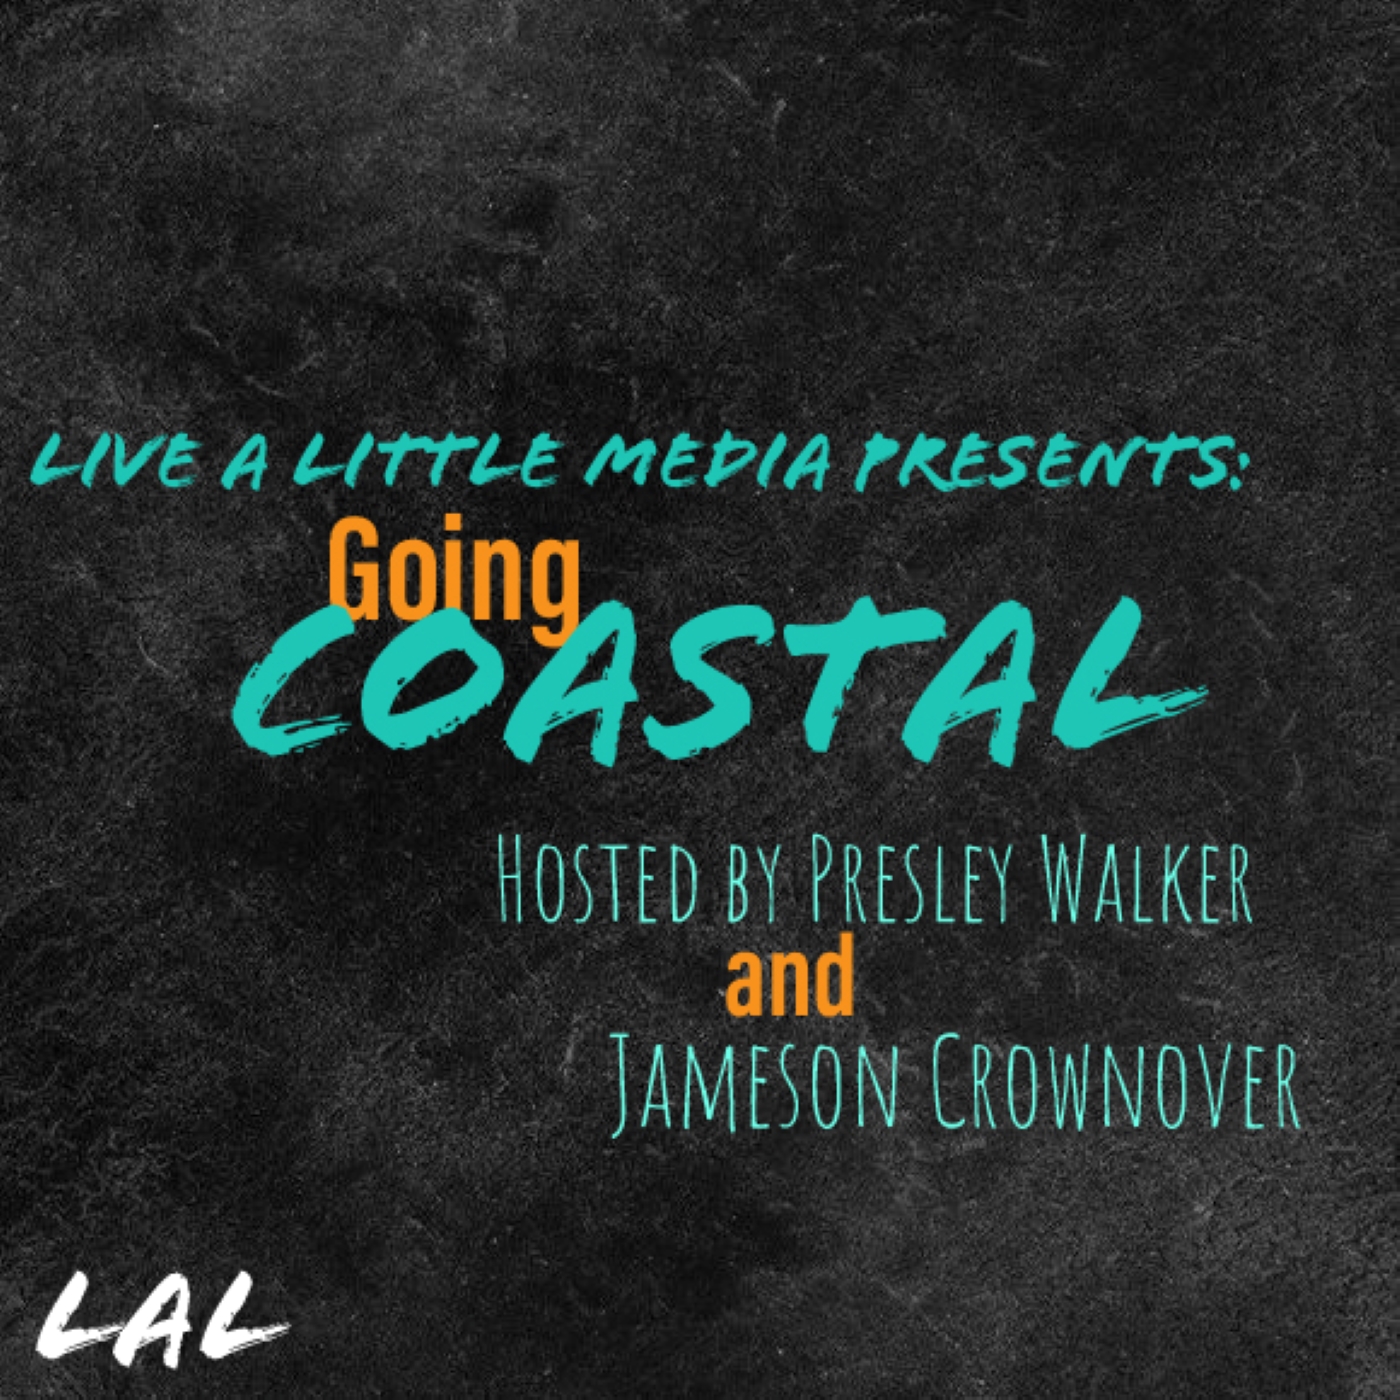 Artwork for LAL Media Presents:Going Coastal Sports Show